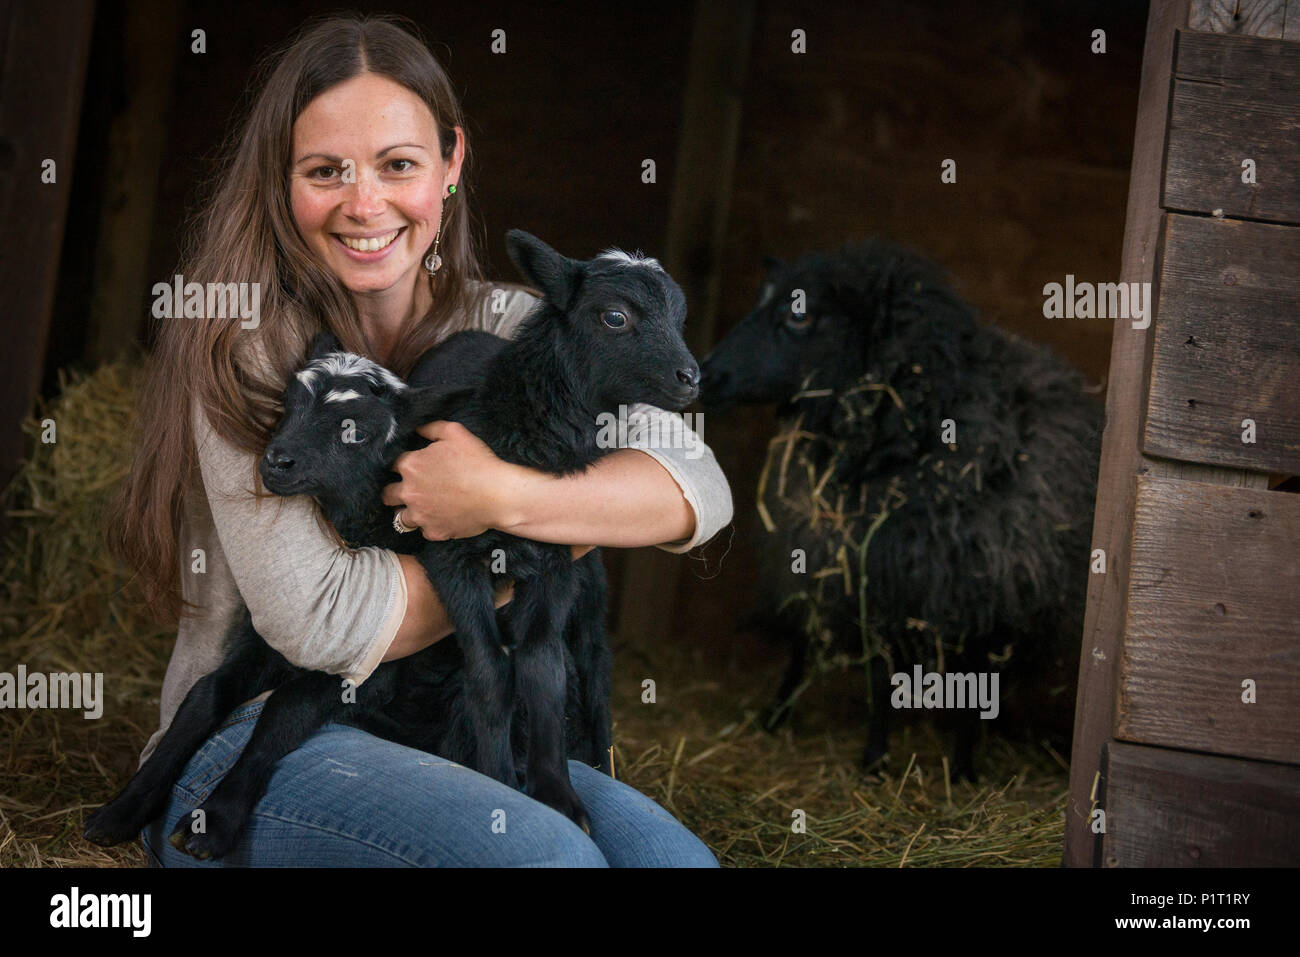 Portrait of an attractive woman with baby black sheep in a rural setting. Stock Photo